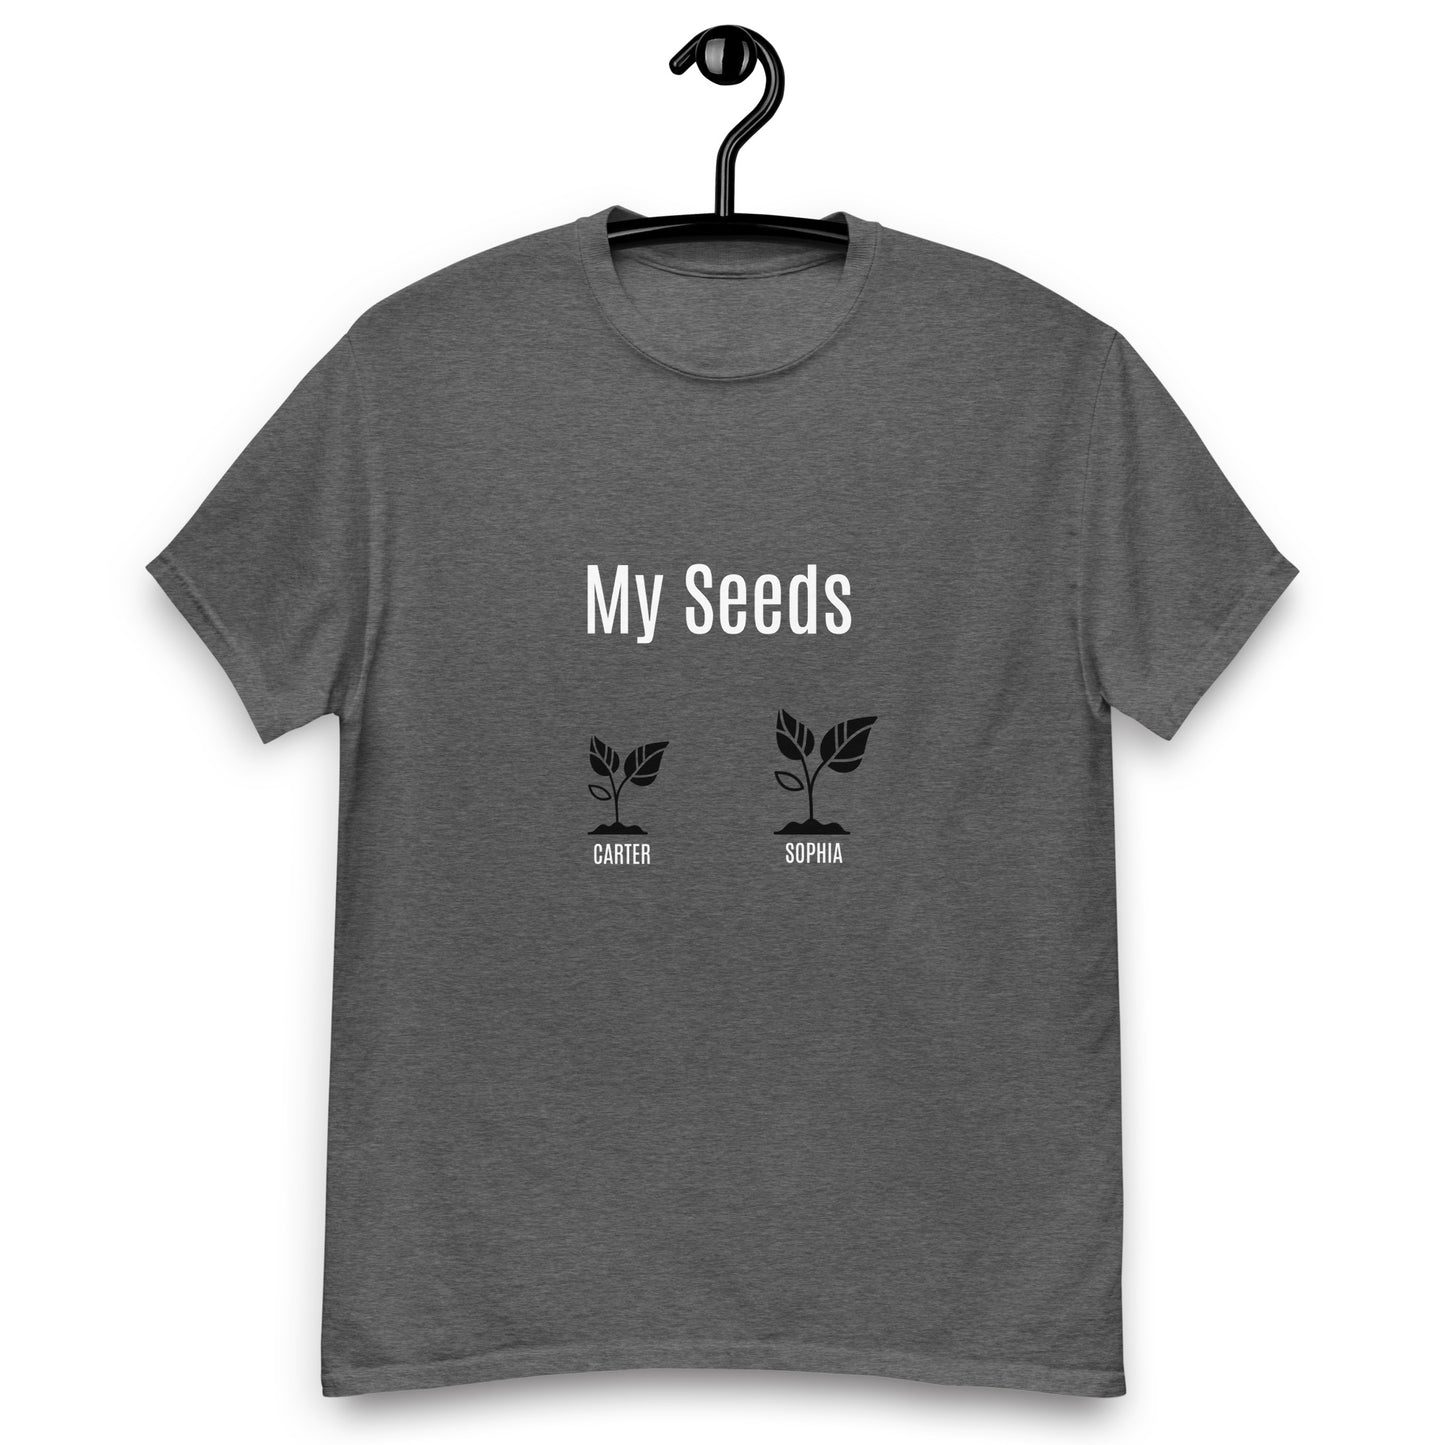 Personalized Father's Day T-shirt - My Seeds